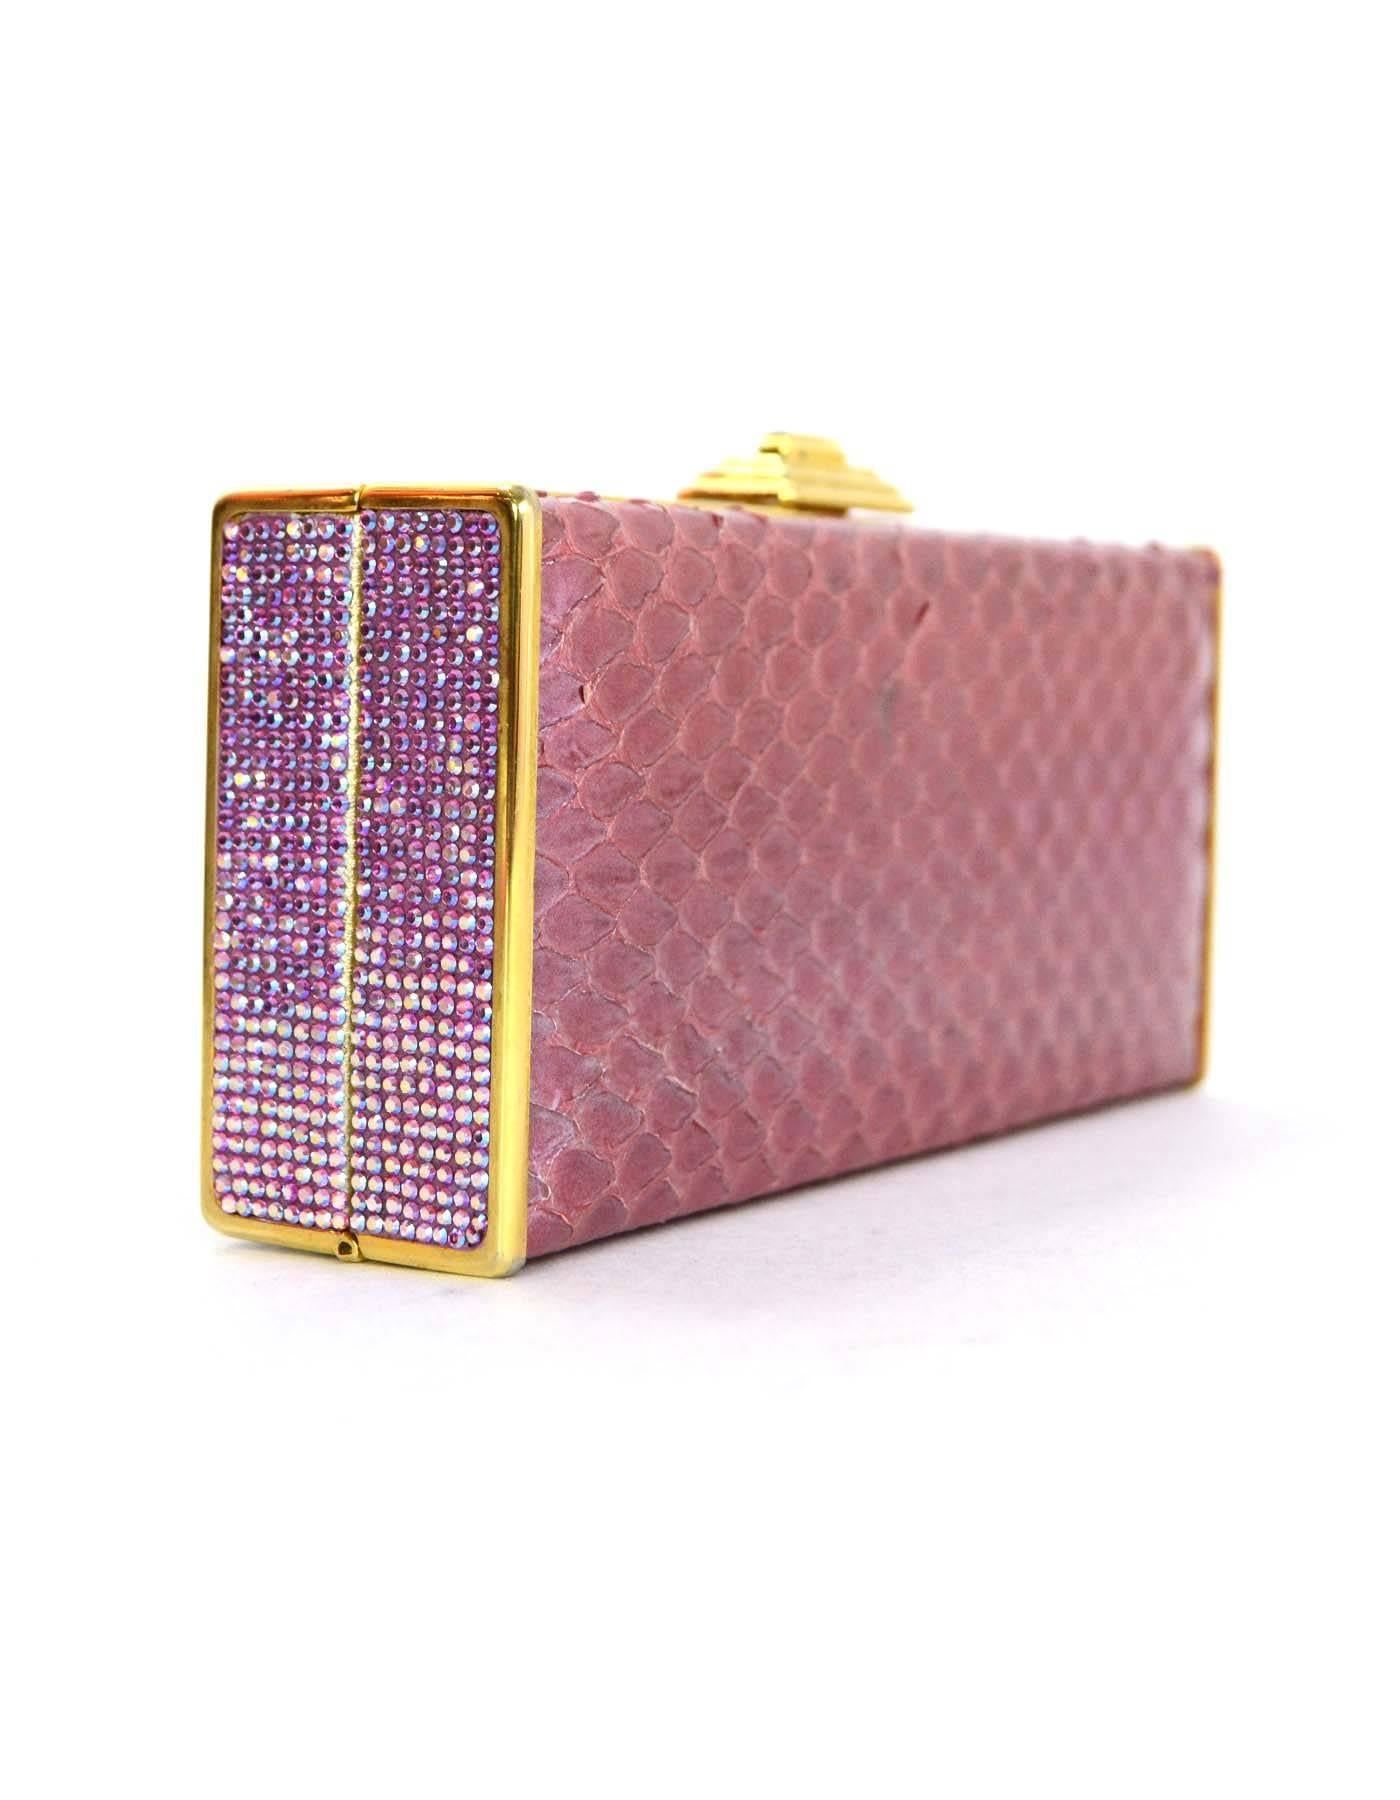 Judith Leiber Iridescent Pink Python & Crystal Minaudiere 
Features pink Swarovski crystal trim throughout and optional goldtone chain link shoulder strap
Made In: U.S.A
Color: Iridescent pink and goldtone
Hardware: Goldtone
Materials: Python,